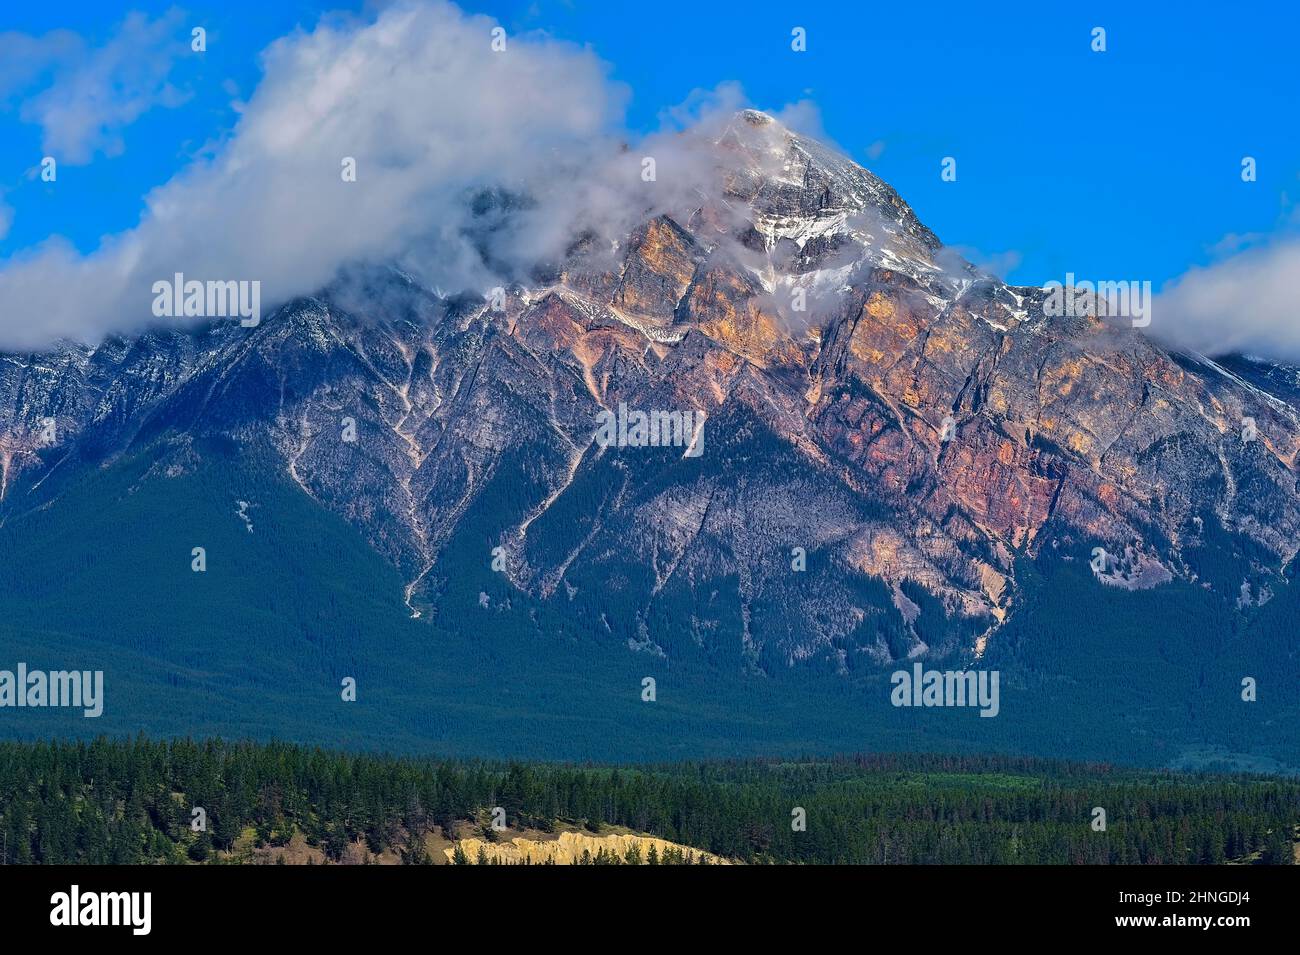 A landscape image of Pyramid Mountain in Jasper National Park in Alberta Canada Stock Photo